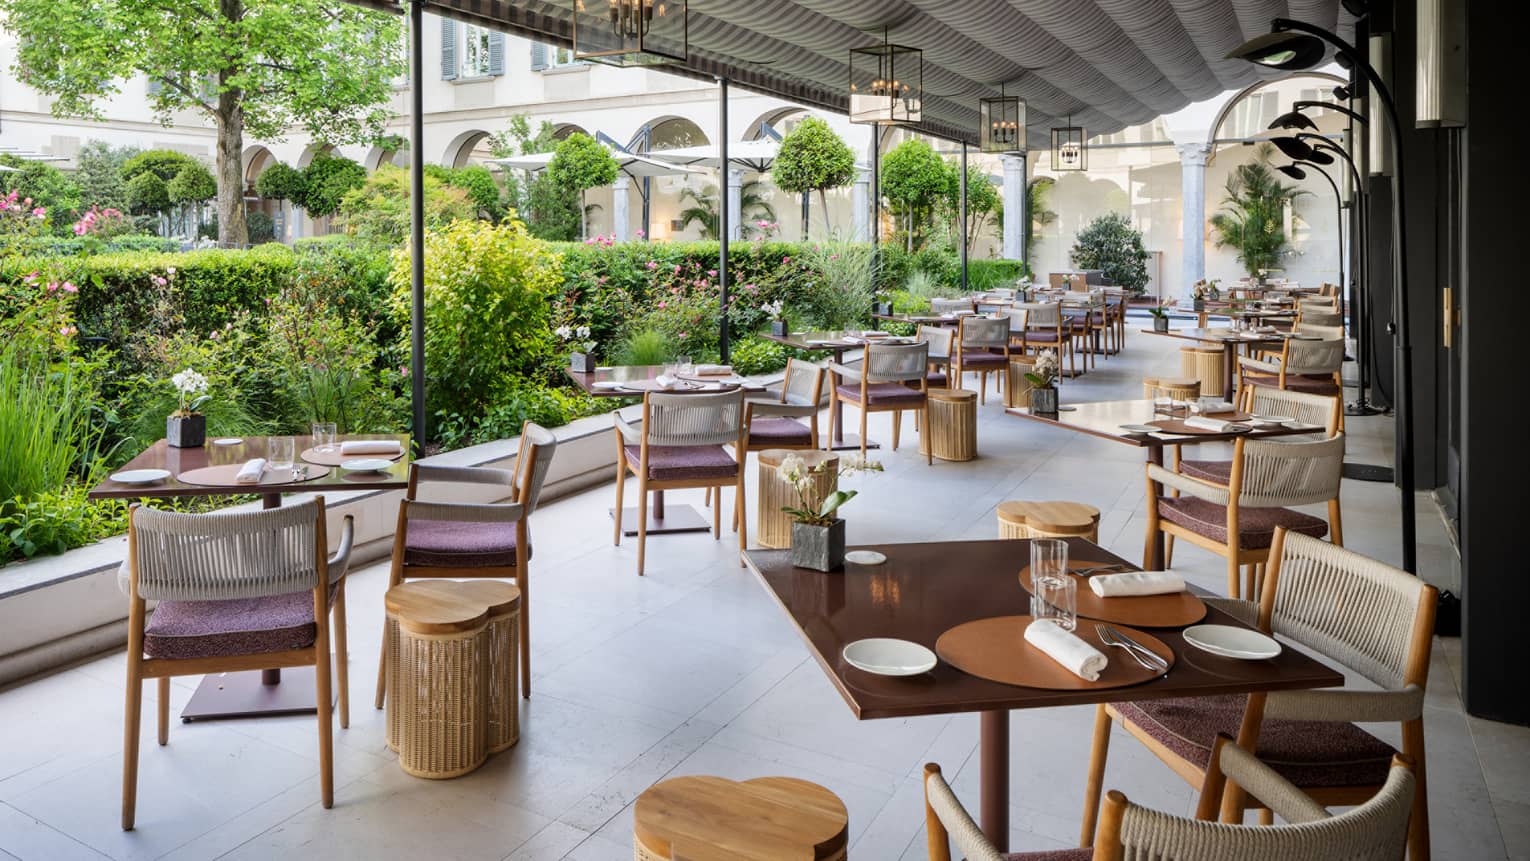 Covered terrace dining area lined with two rows of square tables looking out to verdant courtyard